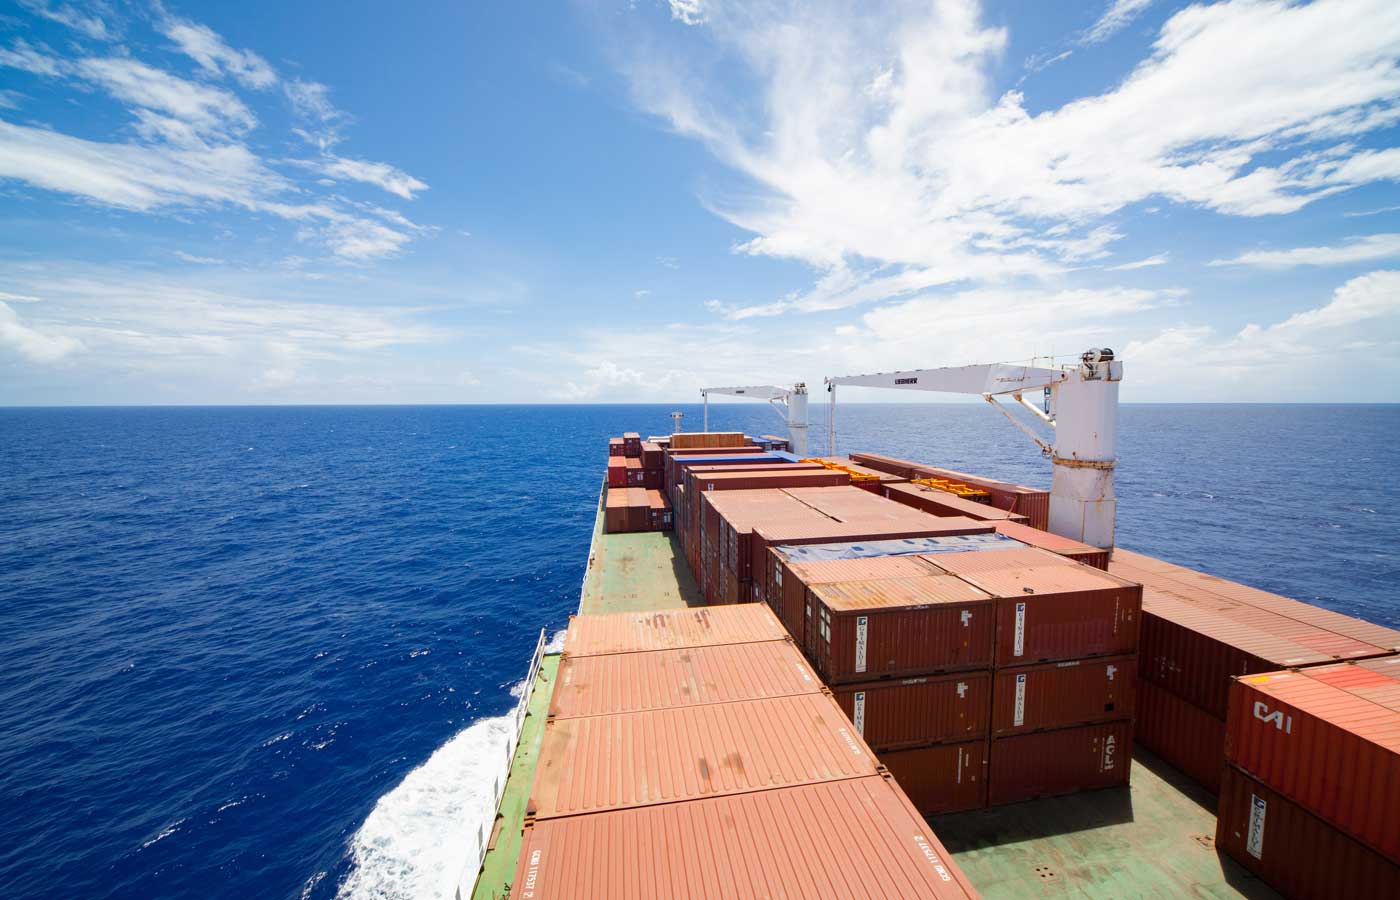 Marine Cargo Insurance - Shows shipping containers on a freight ship